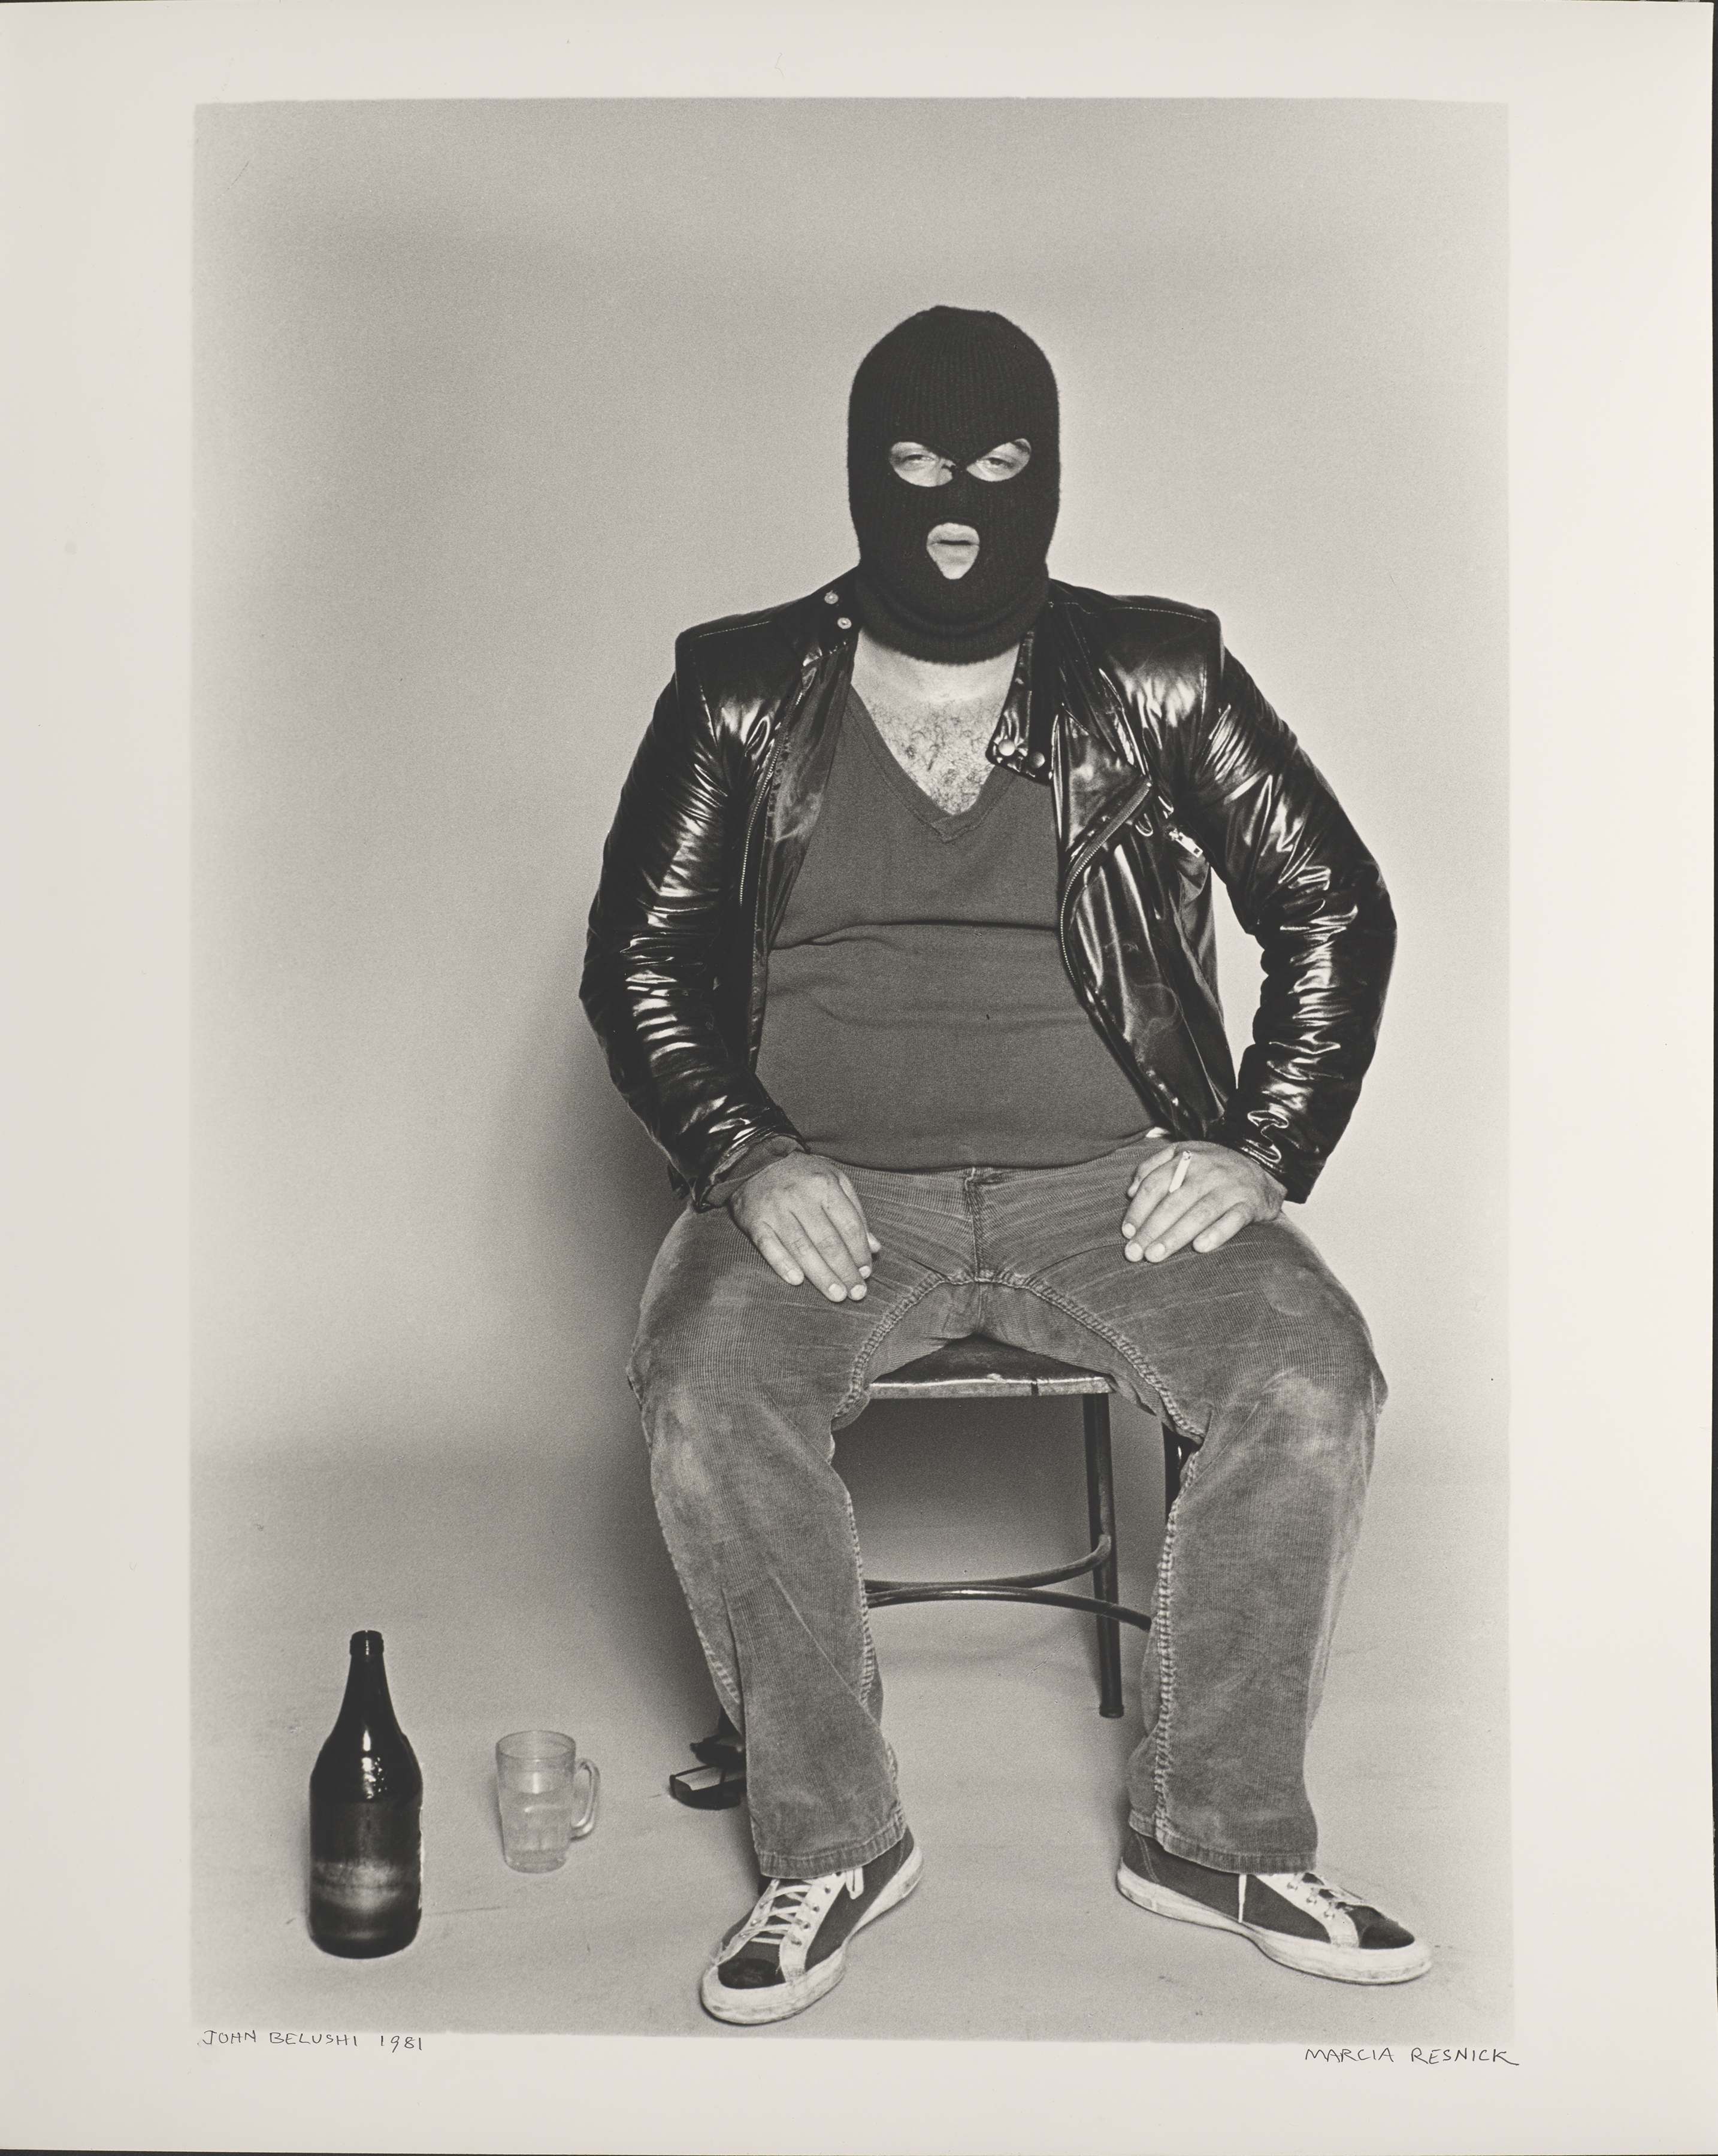 Portrait of John Belushi sitting down on a chair in a vest, jeans, trainers, latex jacket and face mask with a drink and glass next to him photographed by Marcia Resnick.